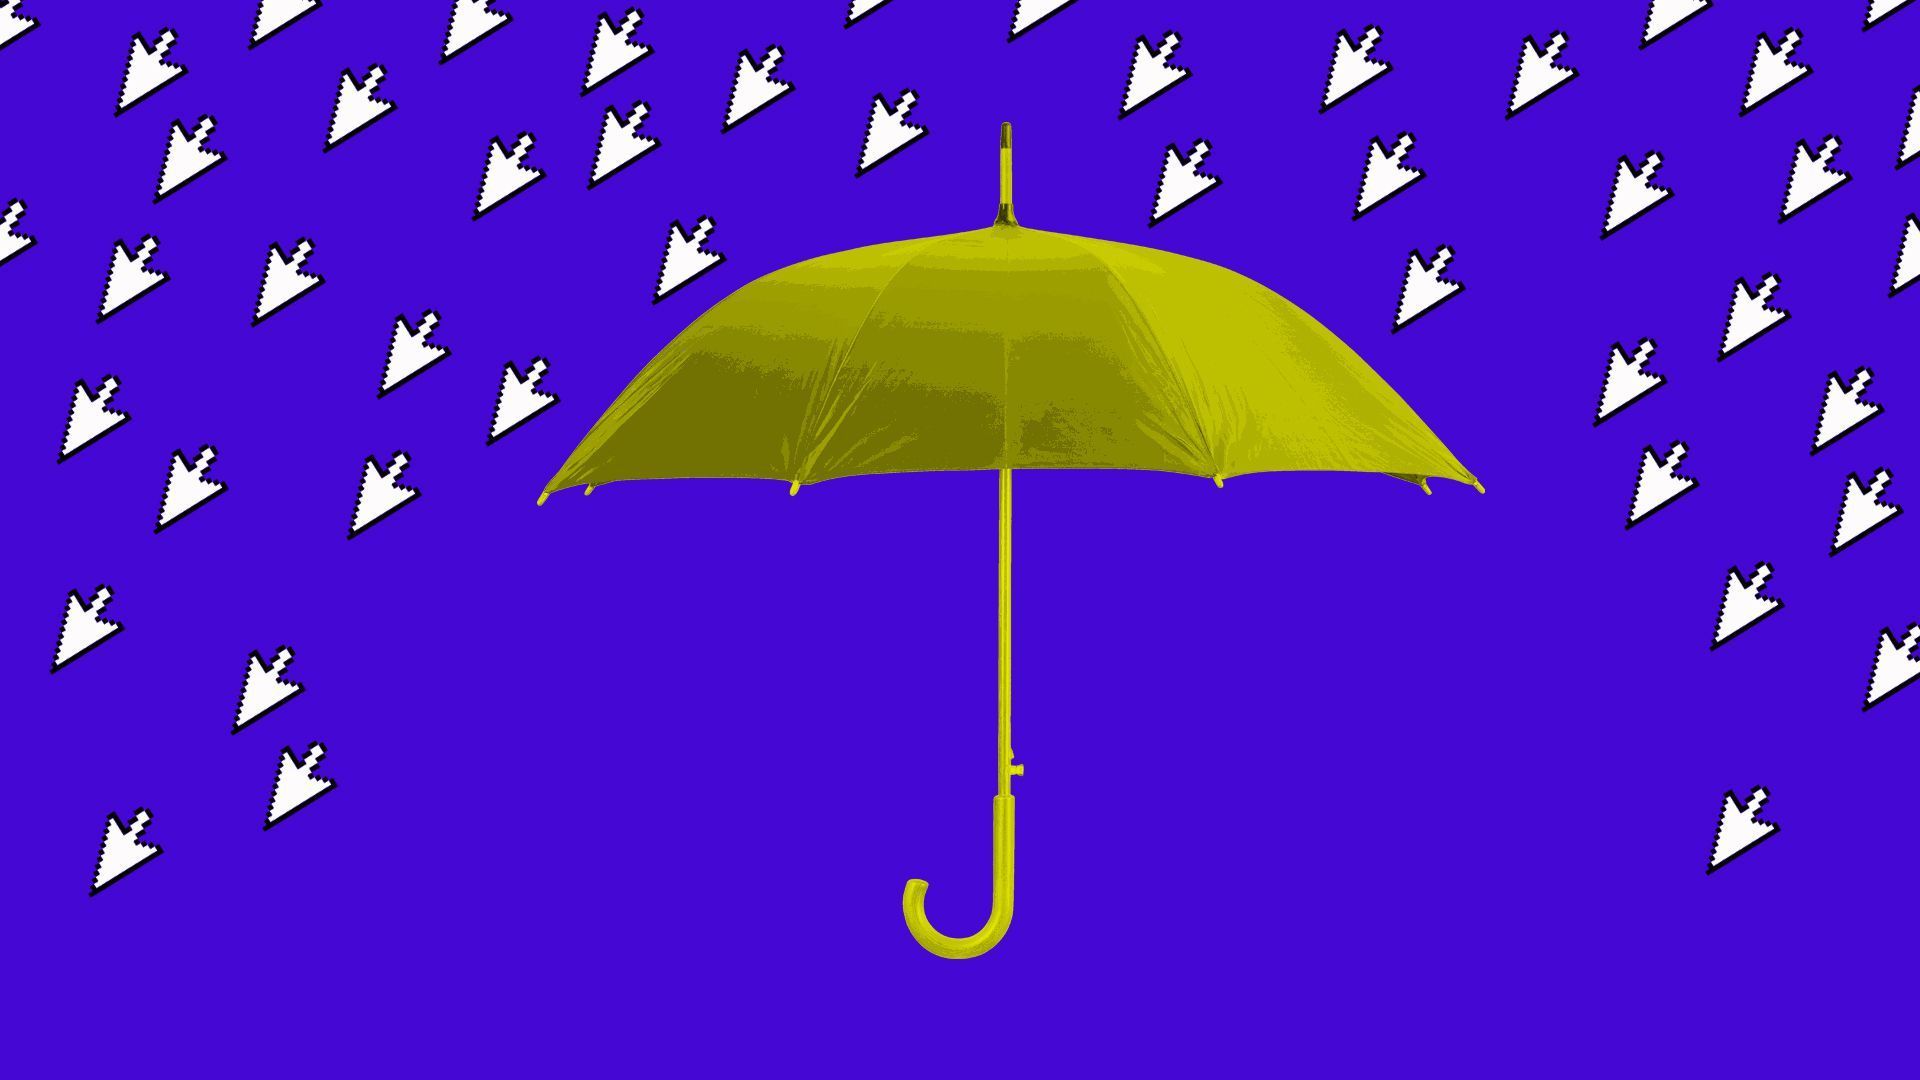 an illustration of an umbrella with cursors raining down on it